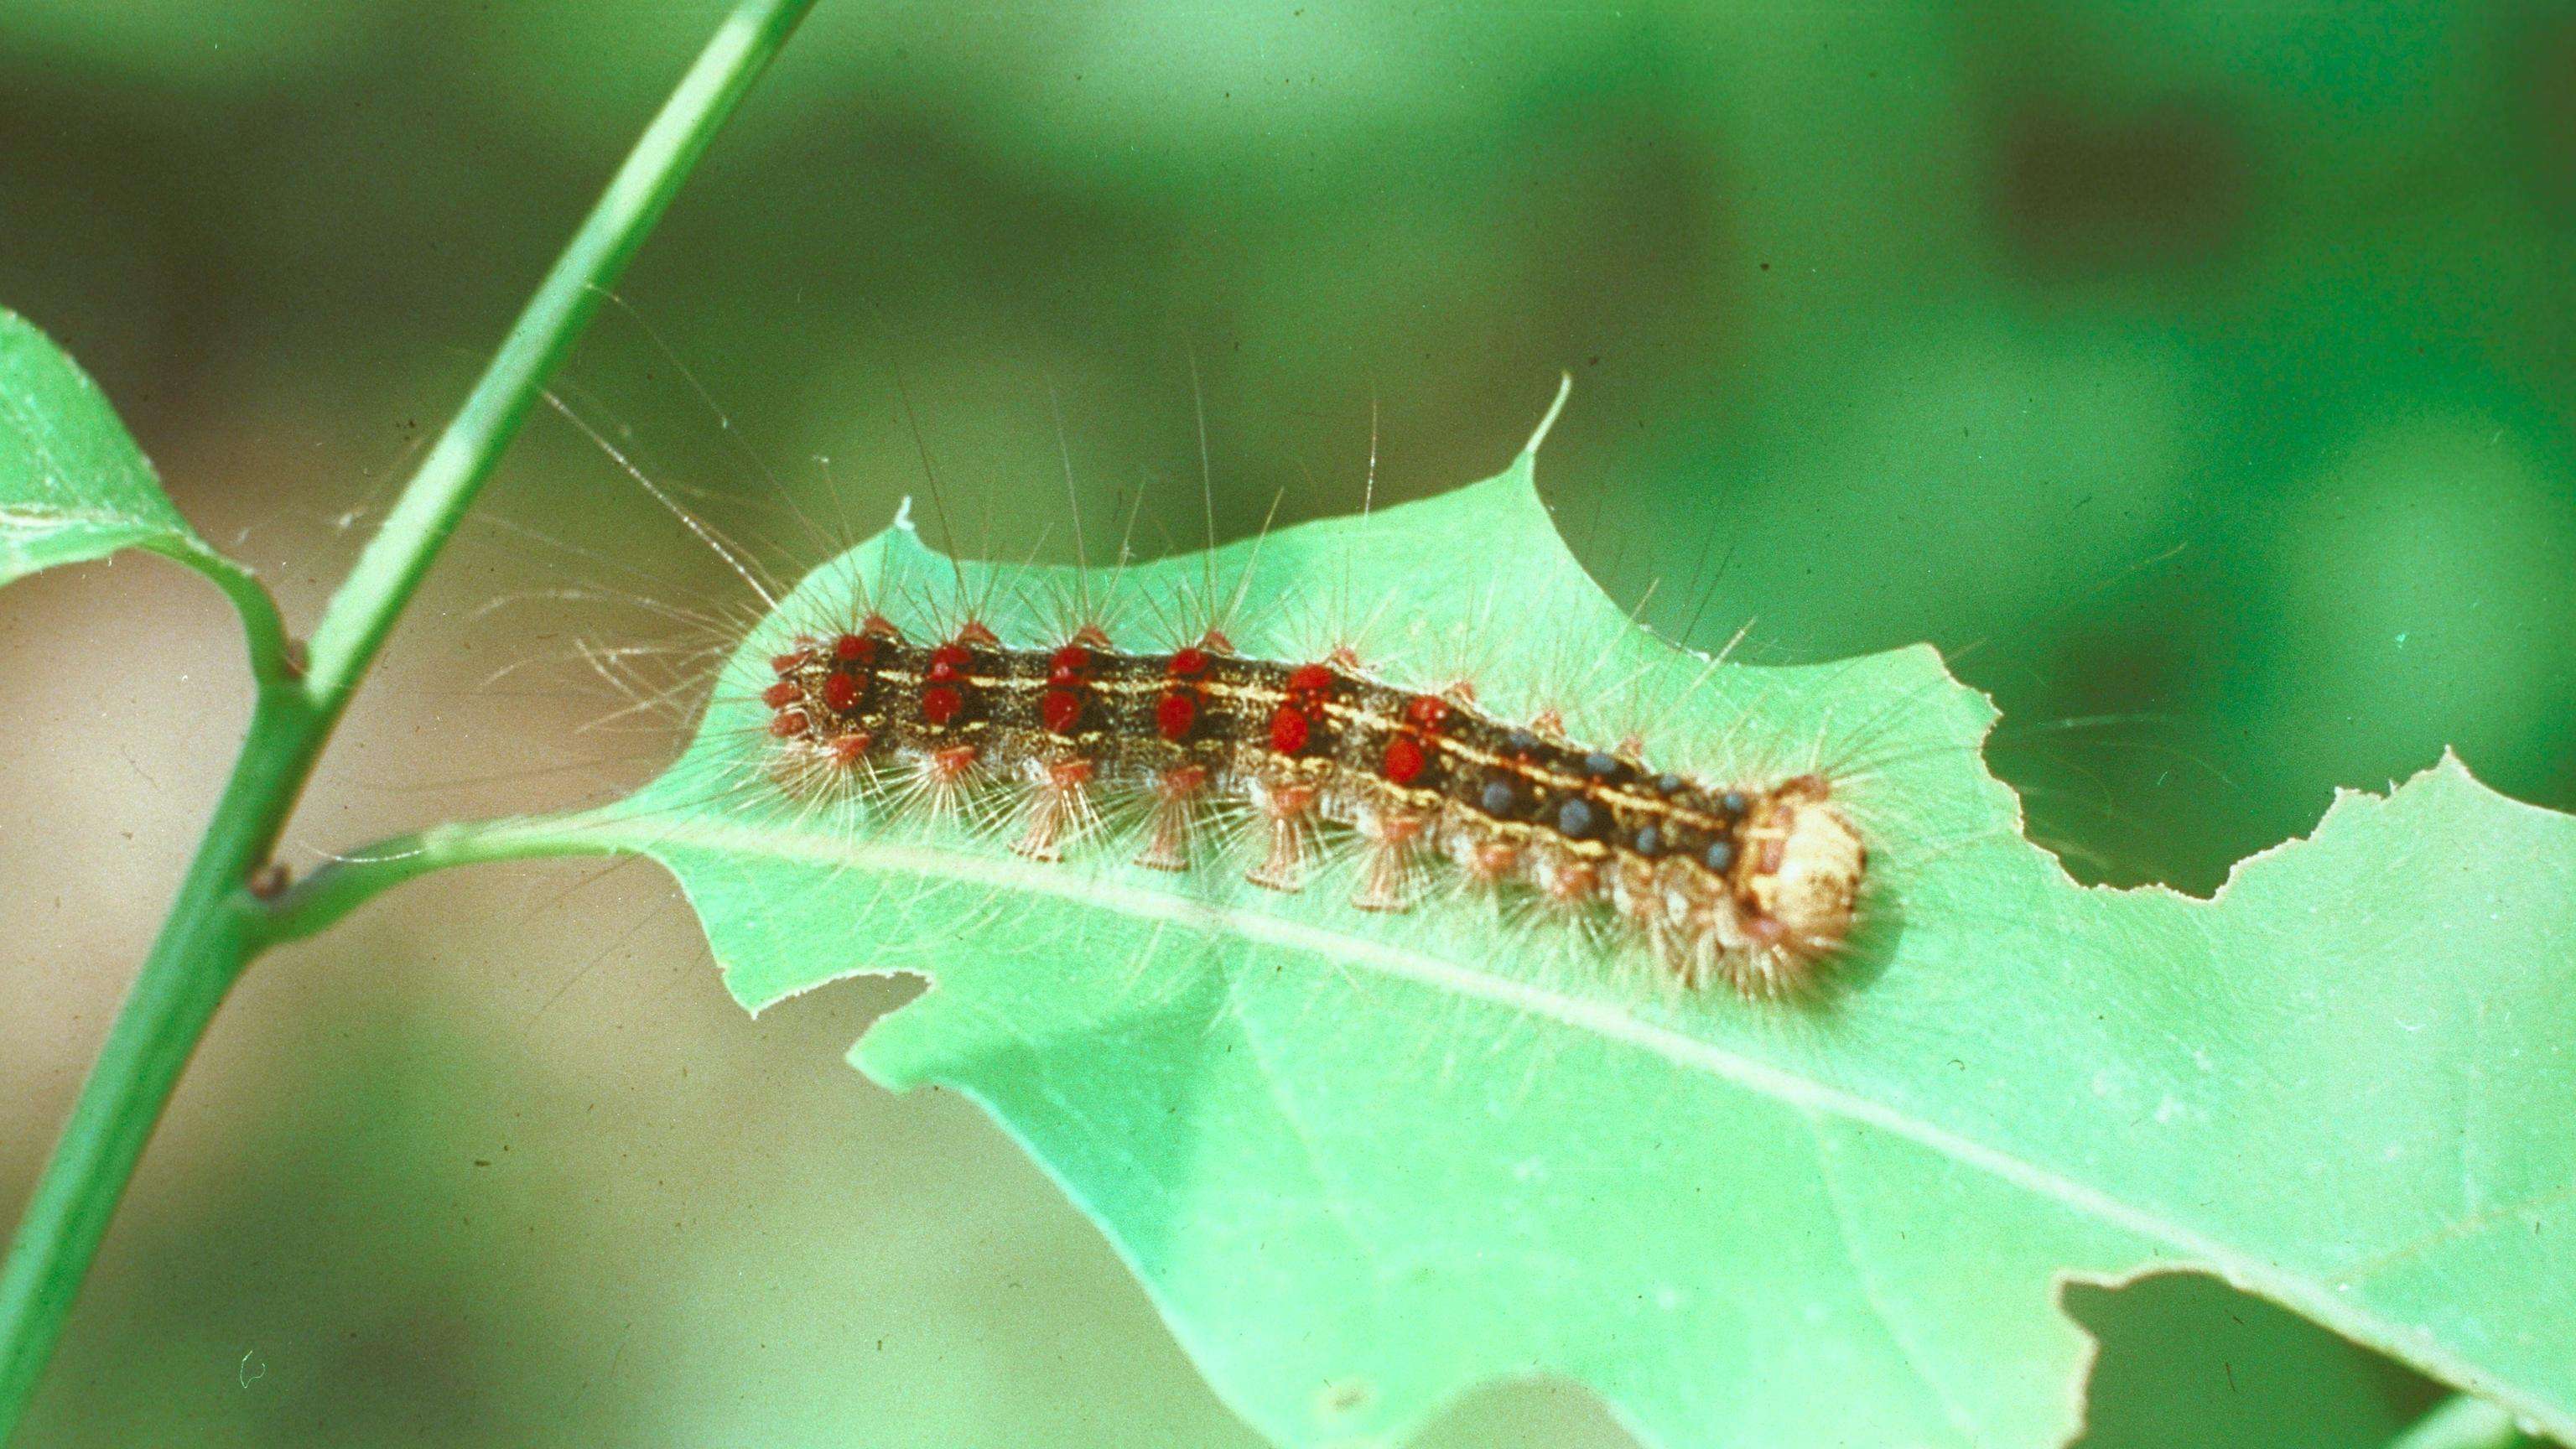 Dark-colored, hairy caterpillar with five pairs of blue dots followed by six pairs of red dots lining its back crawling on a partially eaten leaf.